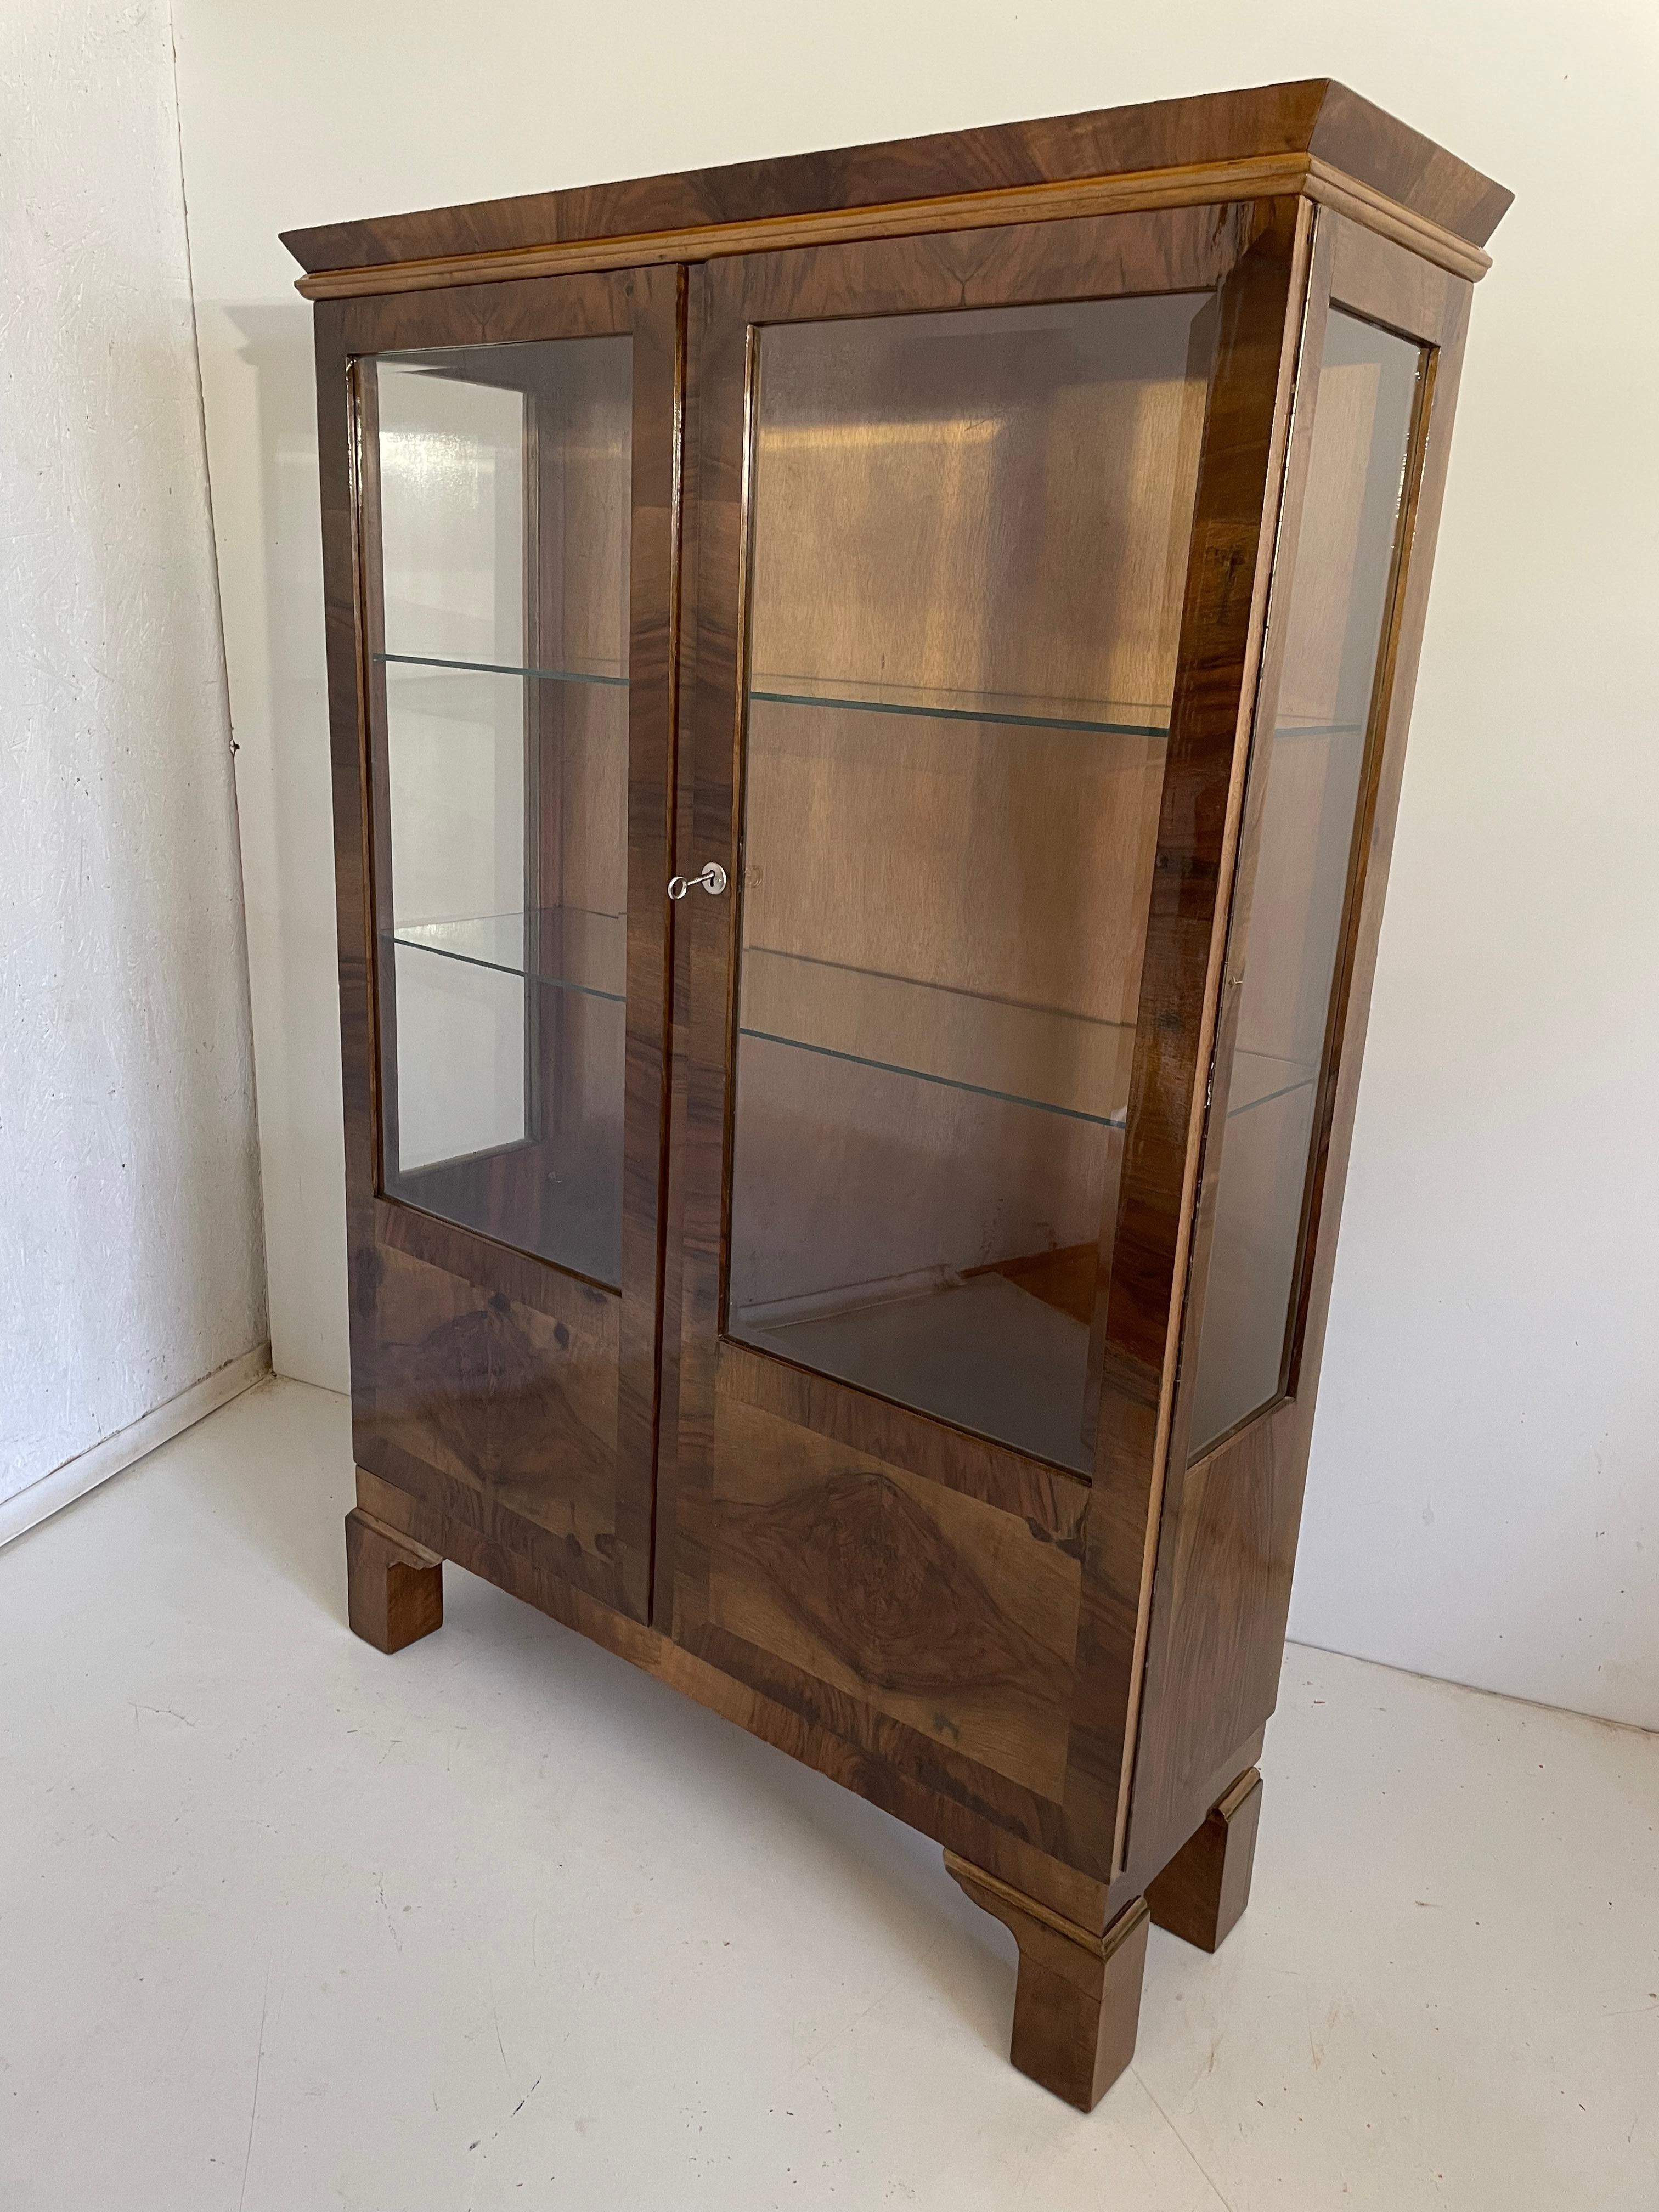 We present a made to order unique designer Art Deco showcase from 1950

It has been cleaned to bare veneer, disinfected and finished by hand with high gloss shellac polish.

Every piece of furniture that leaves our workshop from the beginning to the